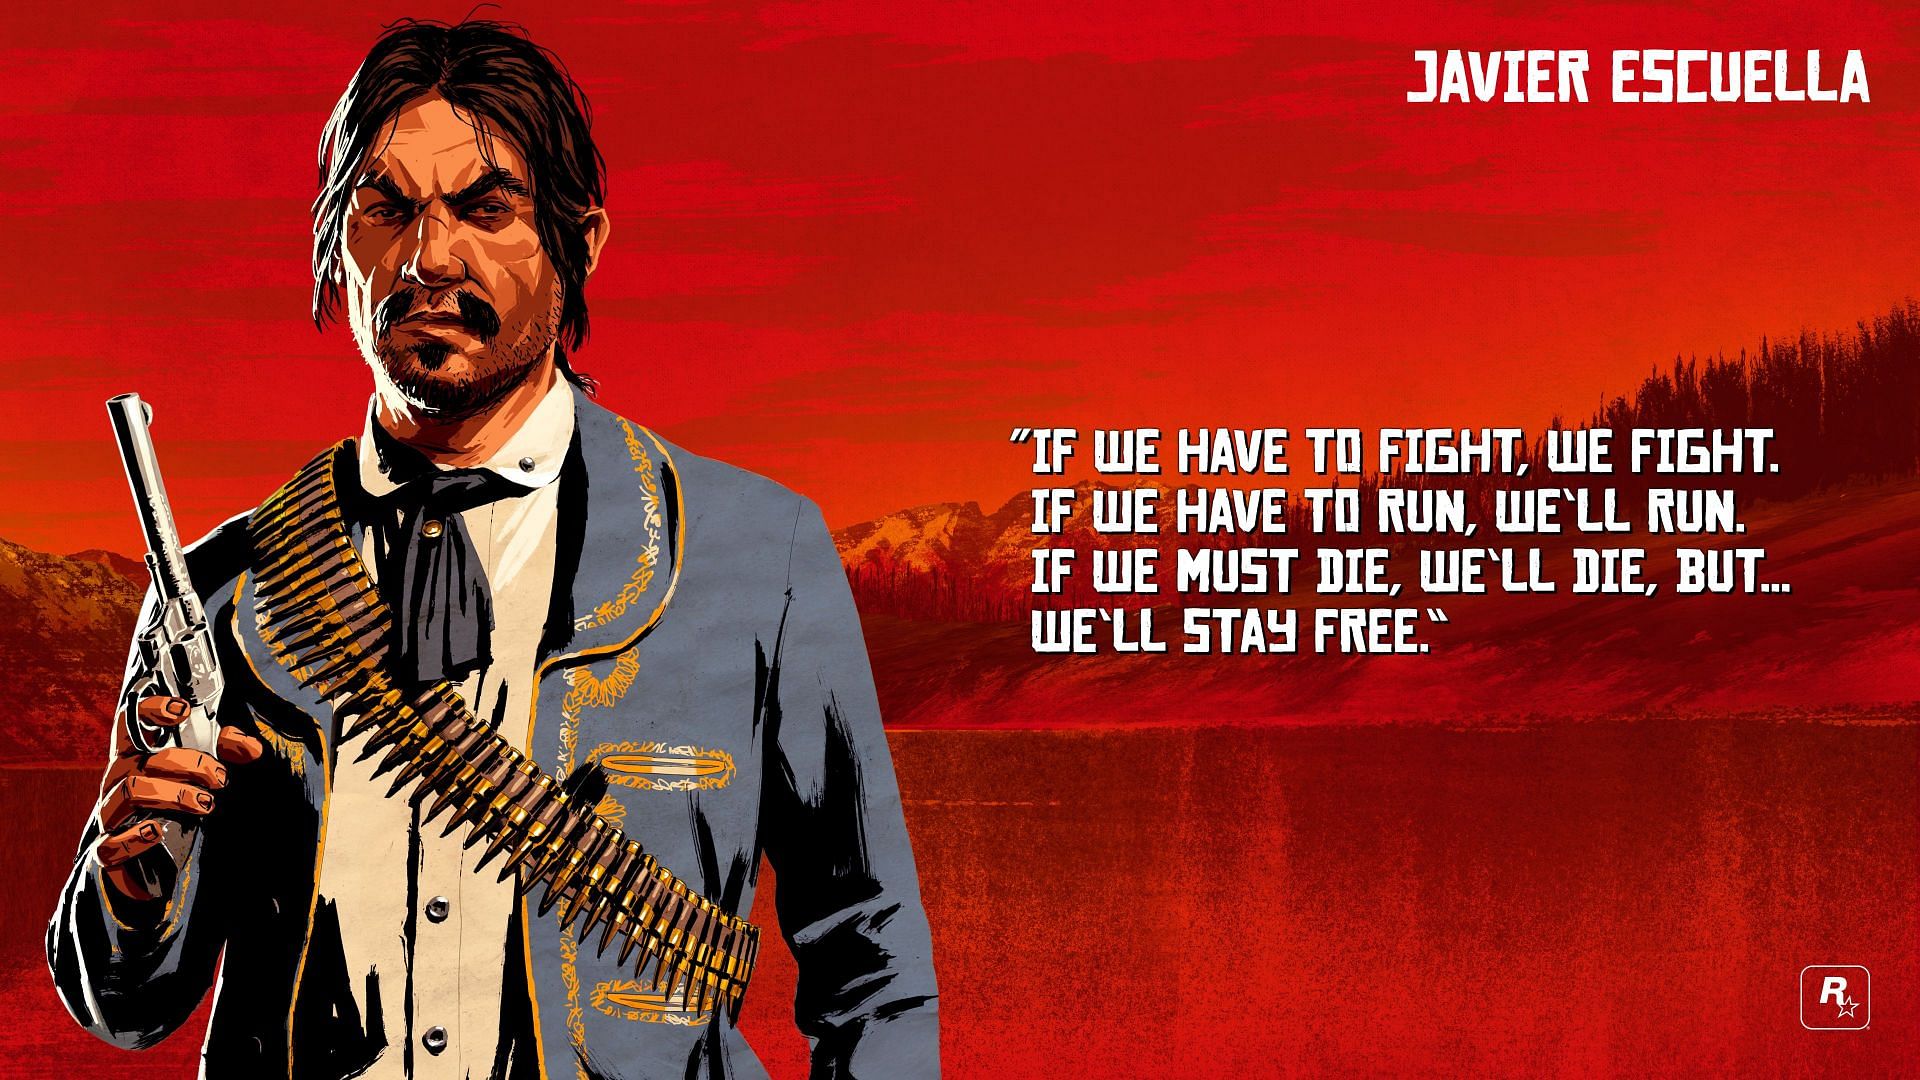 &quot;We will stay free&quot; (Image via Rockstar Games)